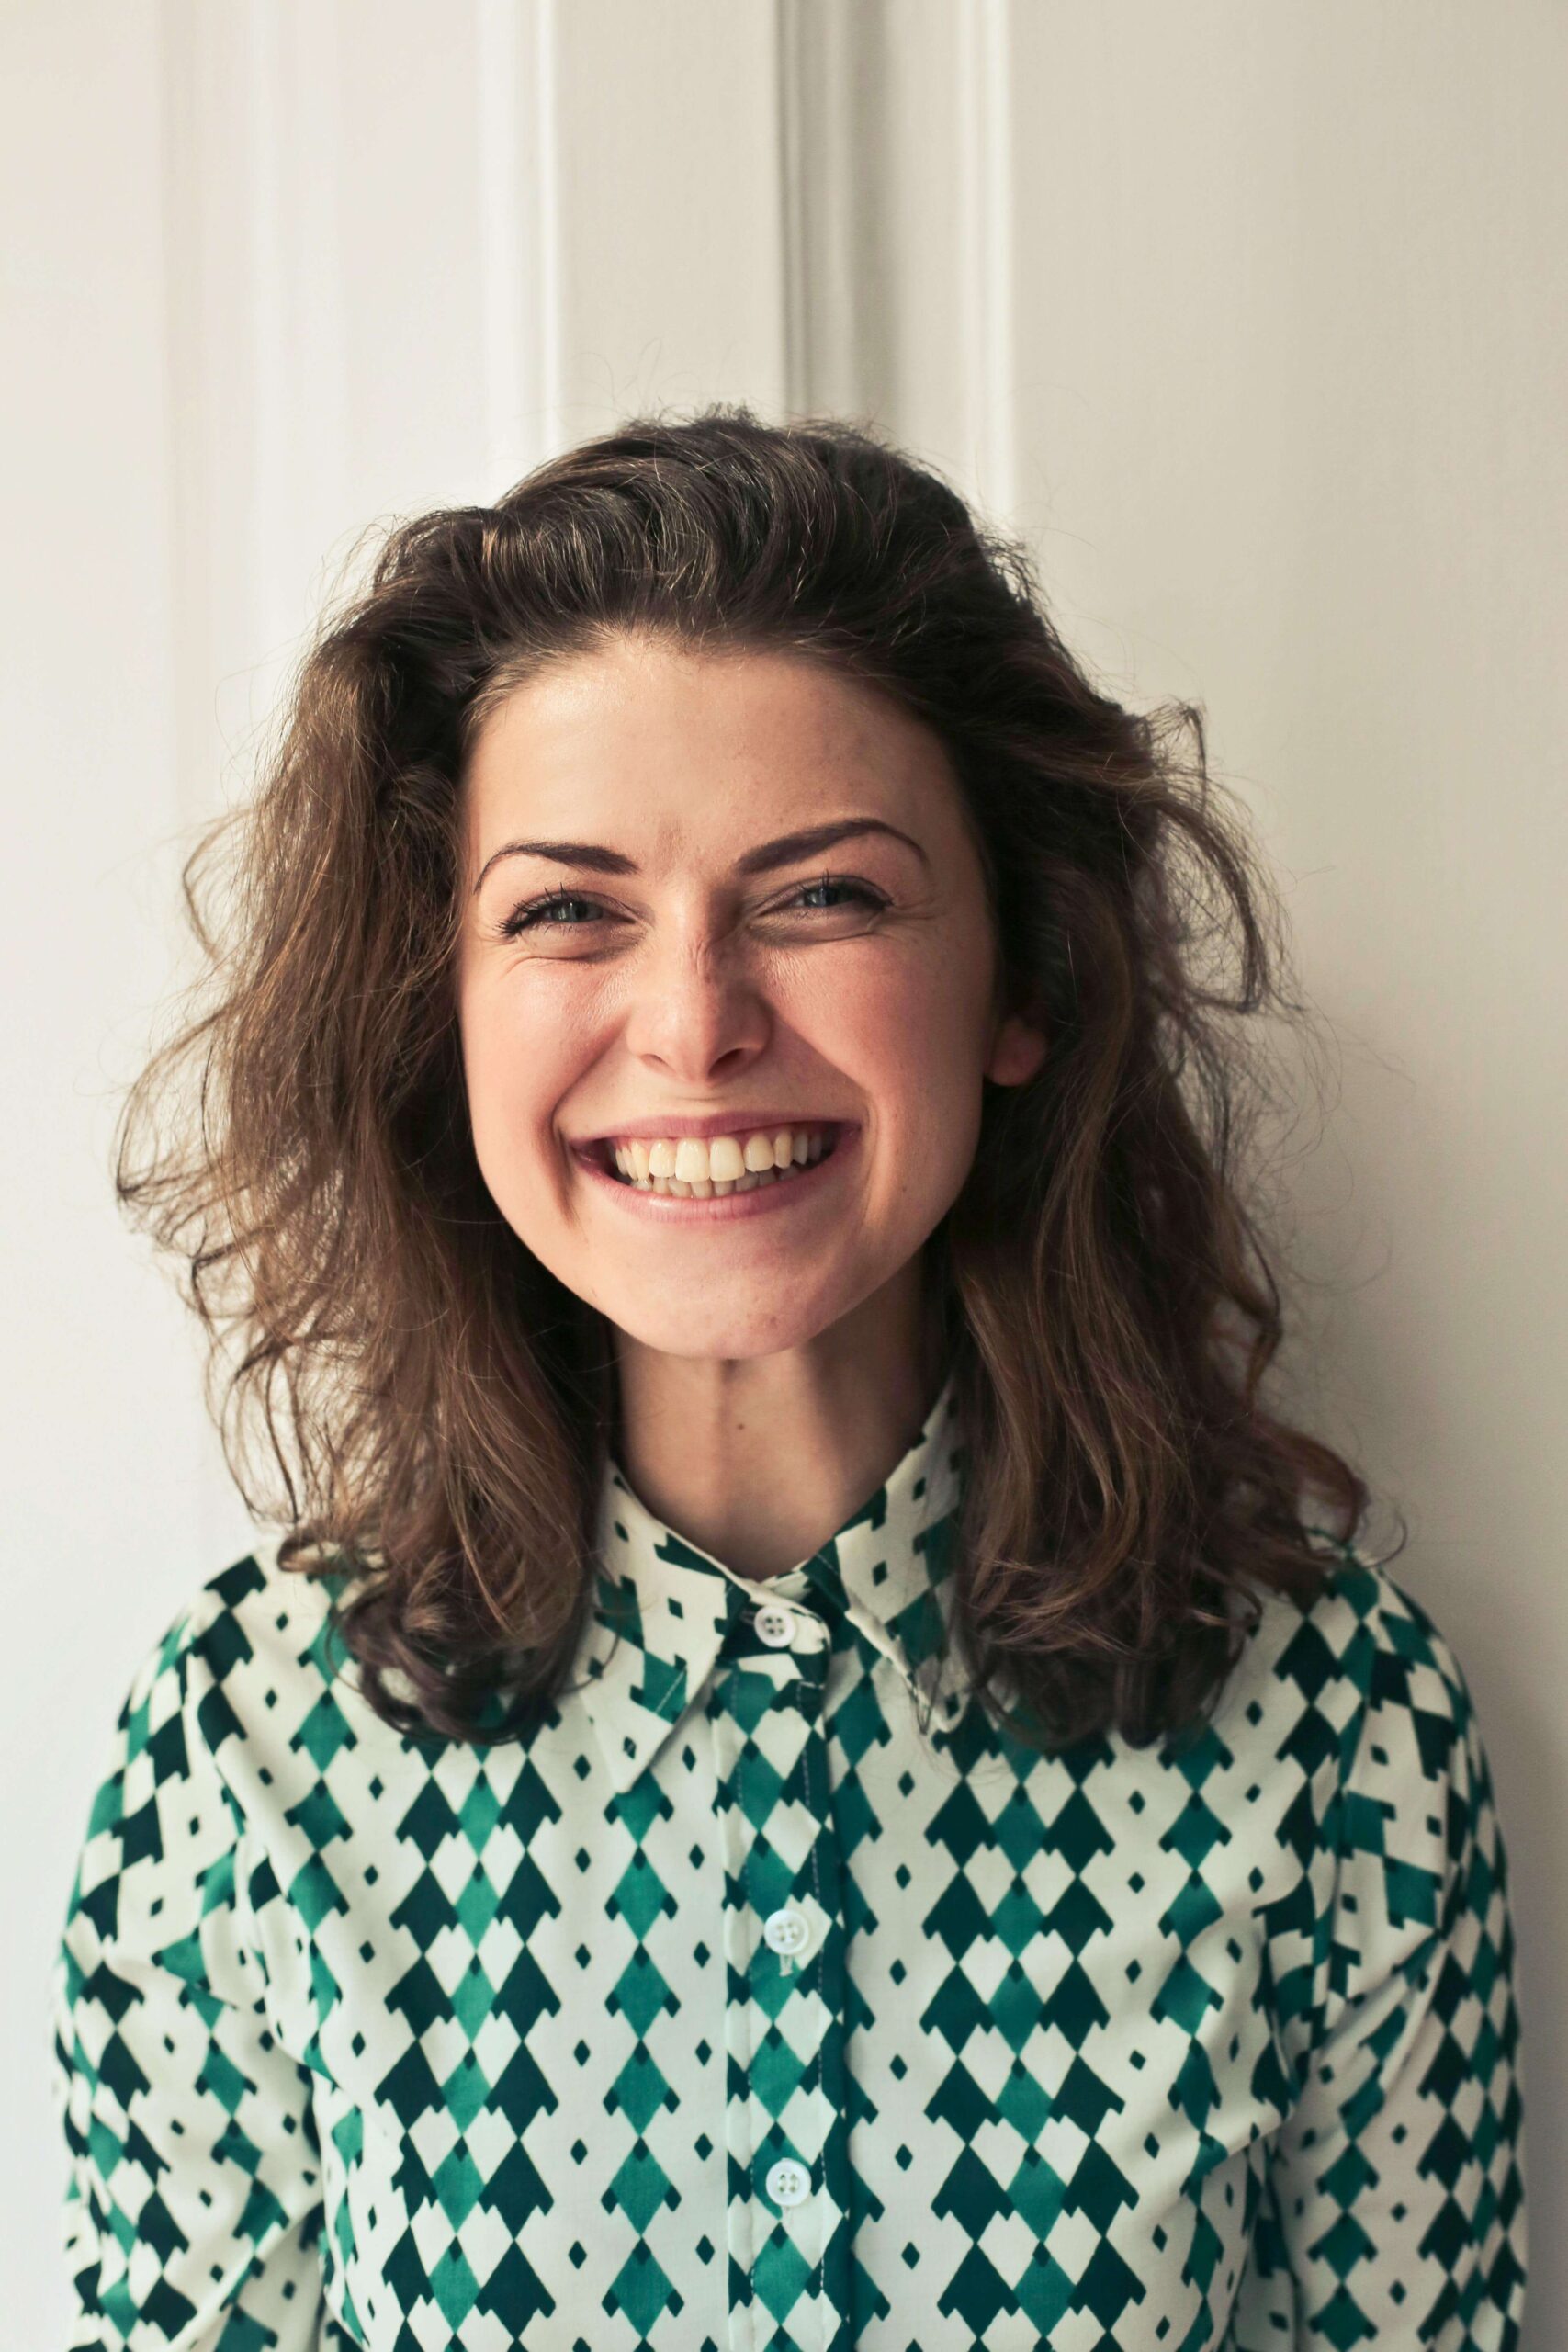 A smiling woman with curly hair, wearing a patterned shirt, exuding satisfaction and happiness